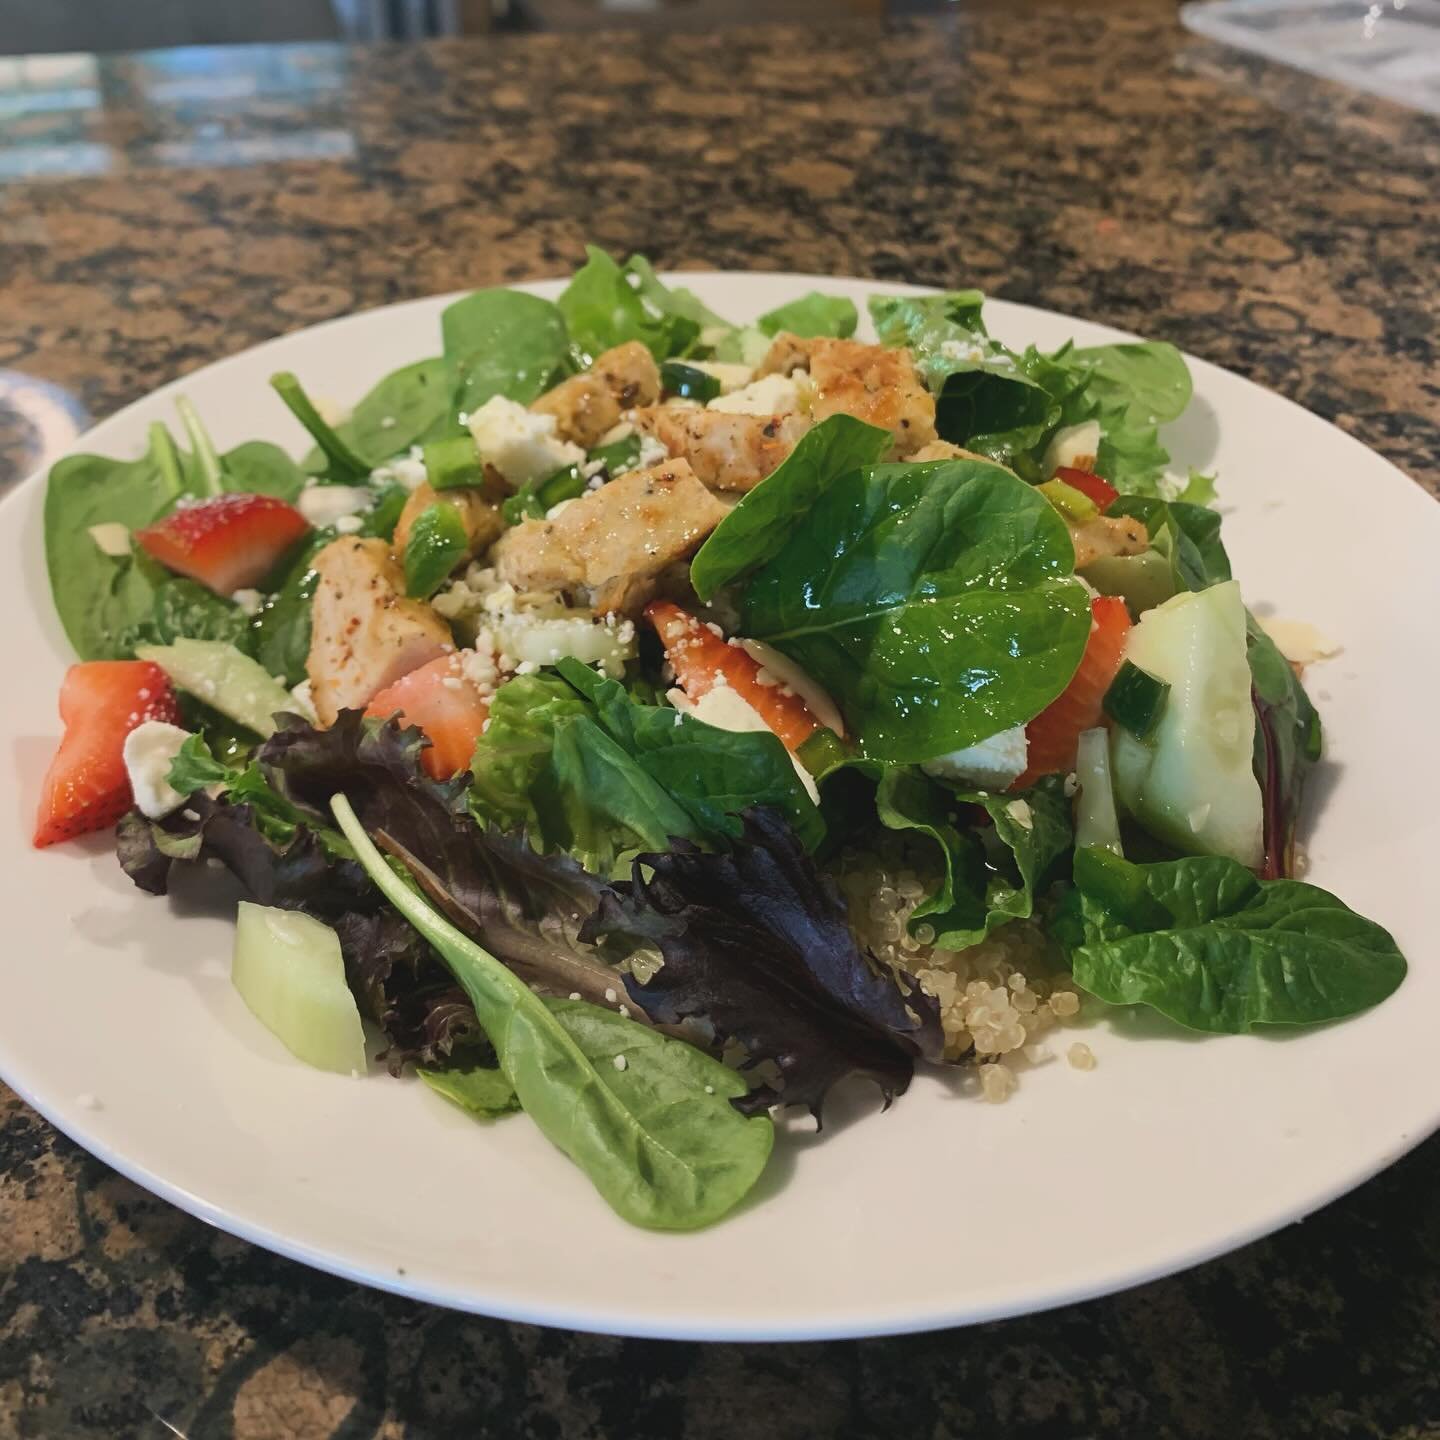 Working on our culinary skills! Members work with our therapists to make beautiful, nutritious meals for lunch everyday! 🥙 😋

#cmi #tbi #communicaremichiganllc #utica #rectherapy #culinary #healthfood #salad